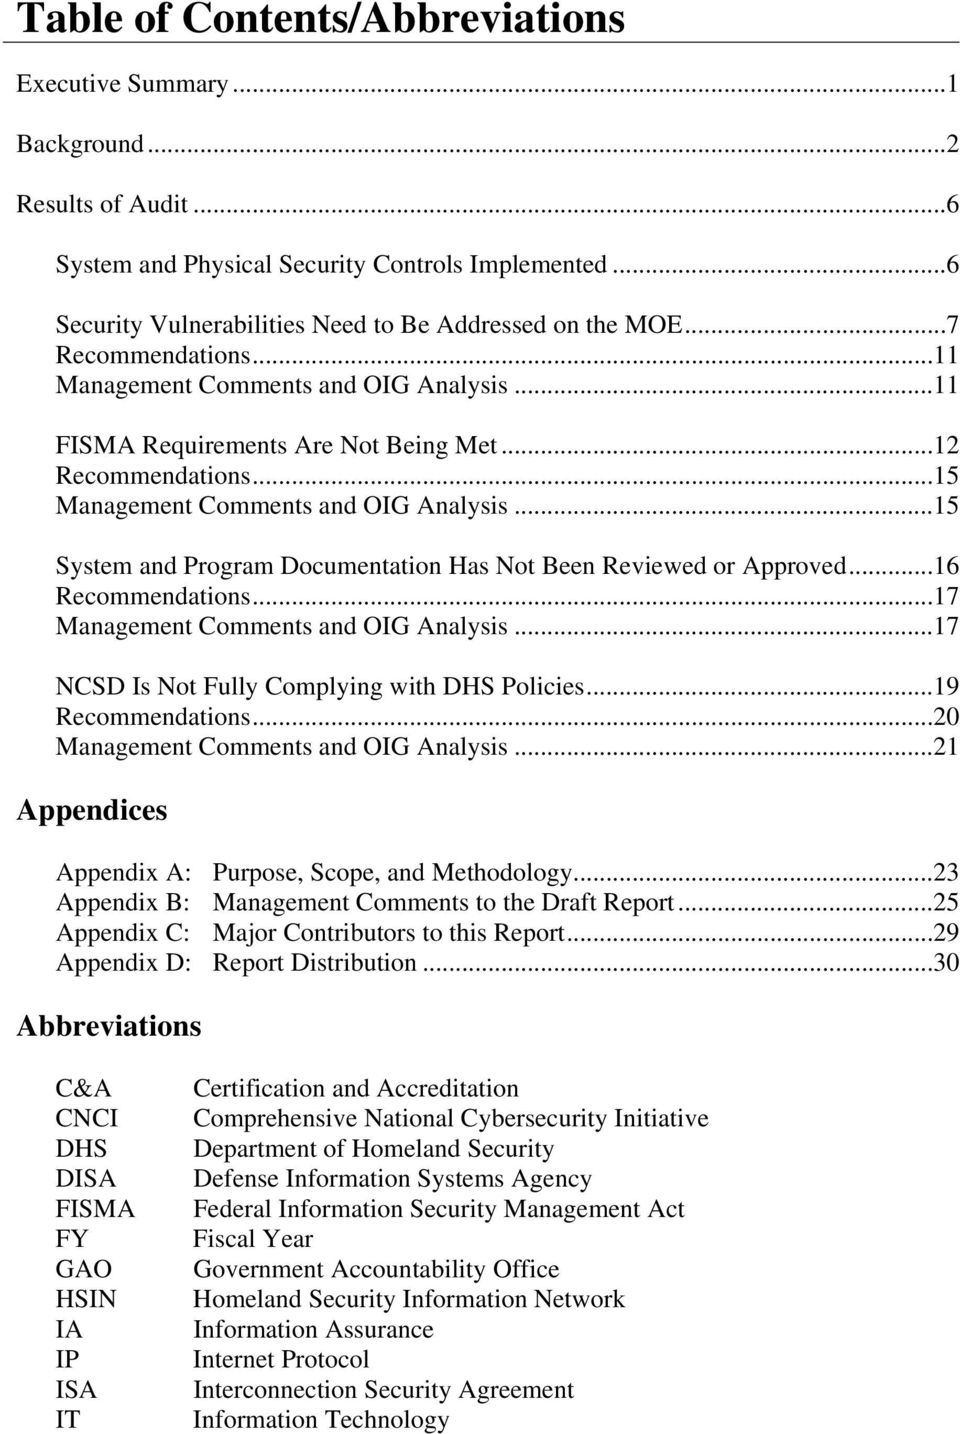 ..15 System and Program Documentation Has Not Been Reviewed or Approved...16 Recommendations...17 Management Comments and OIG Analysis...17 NCSD Is Not Fully Complying with DHS Policies.